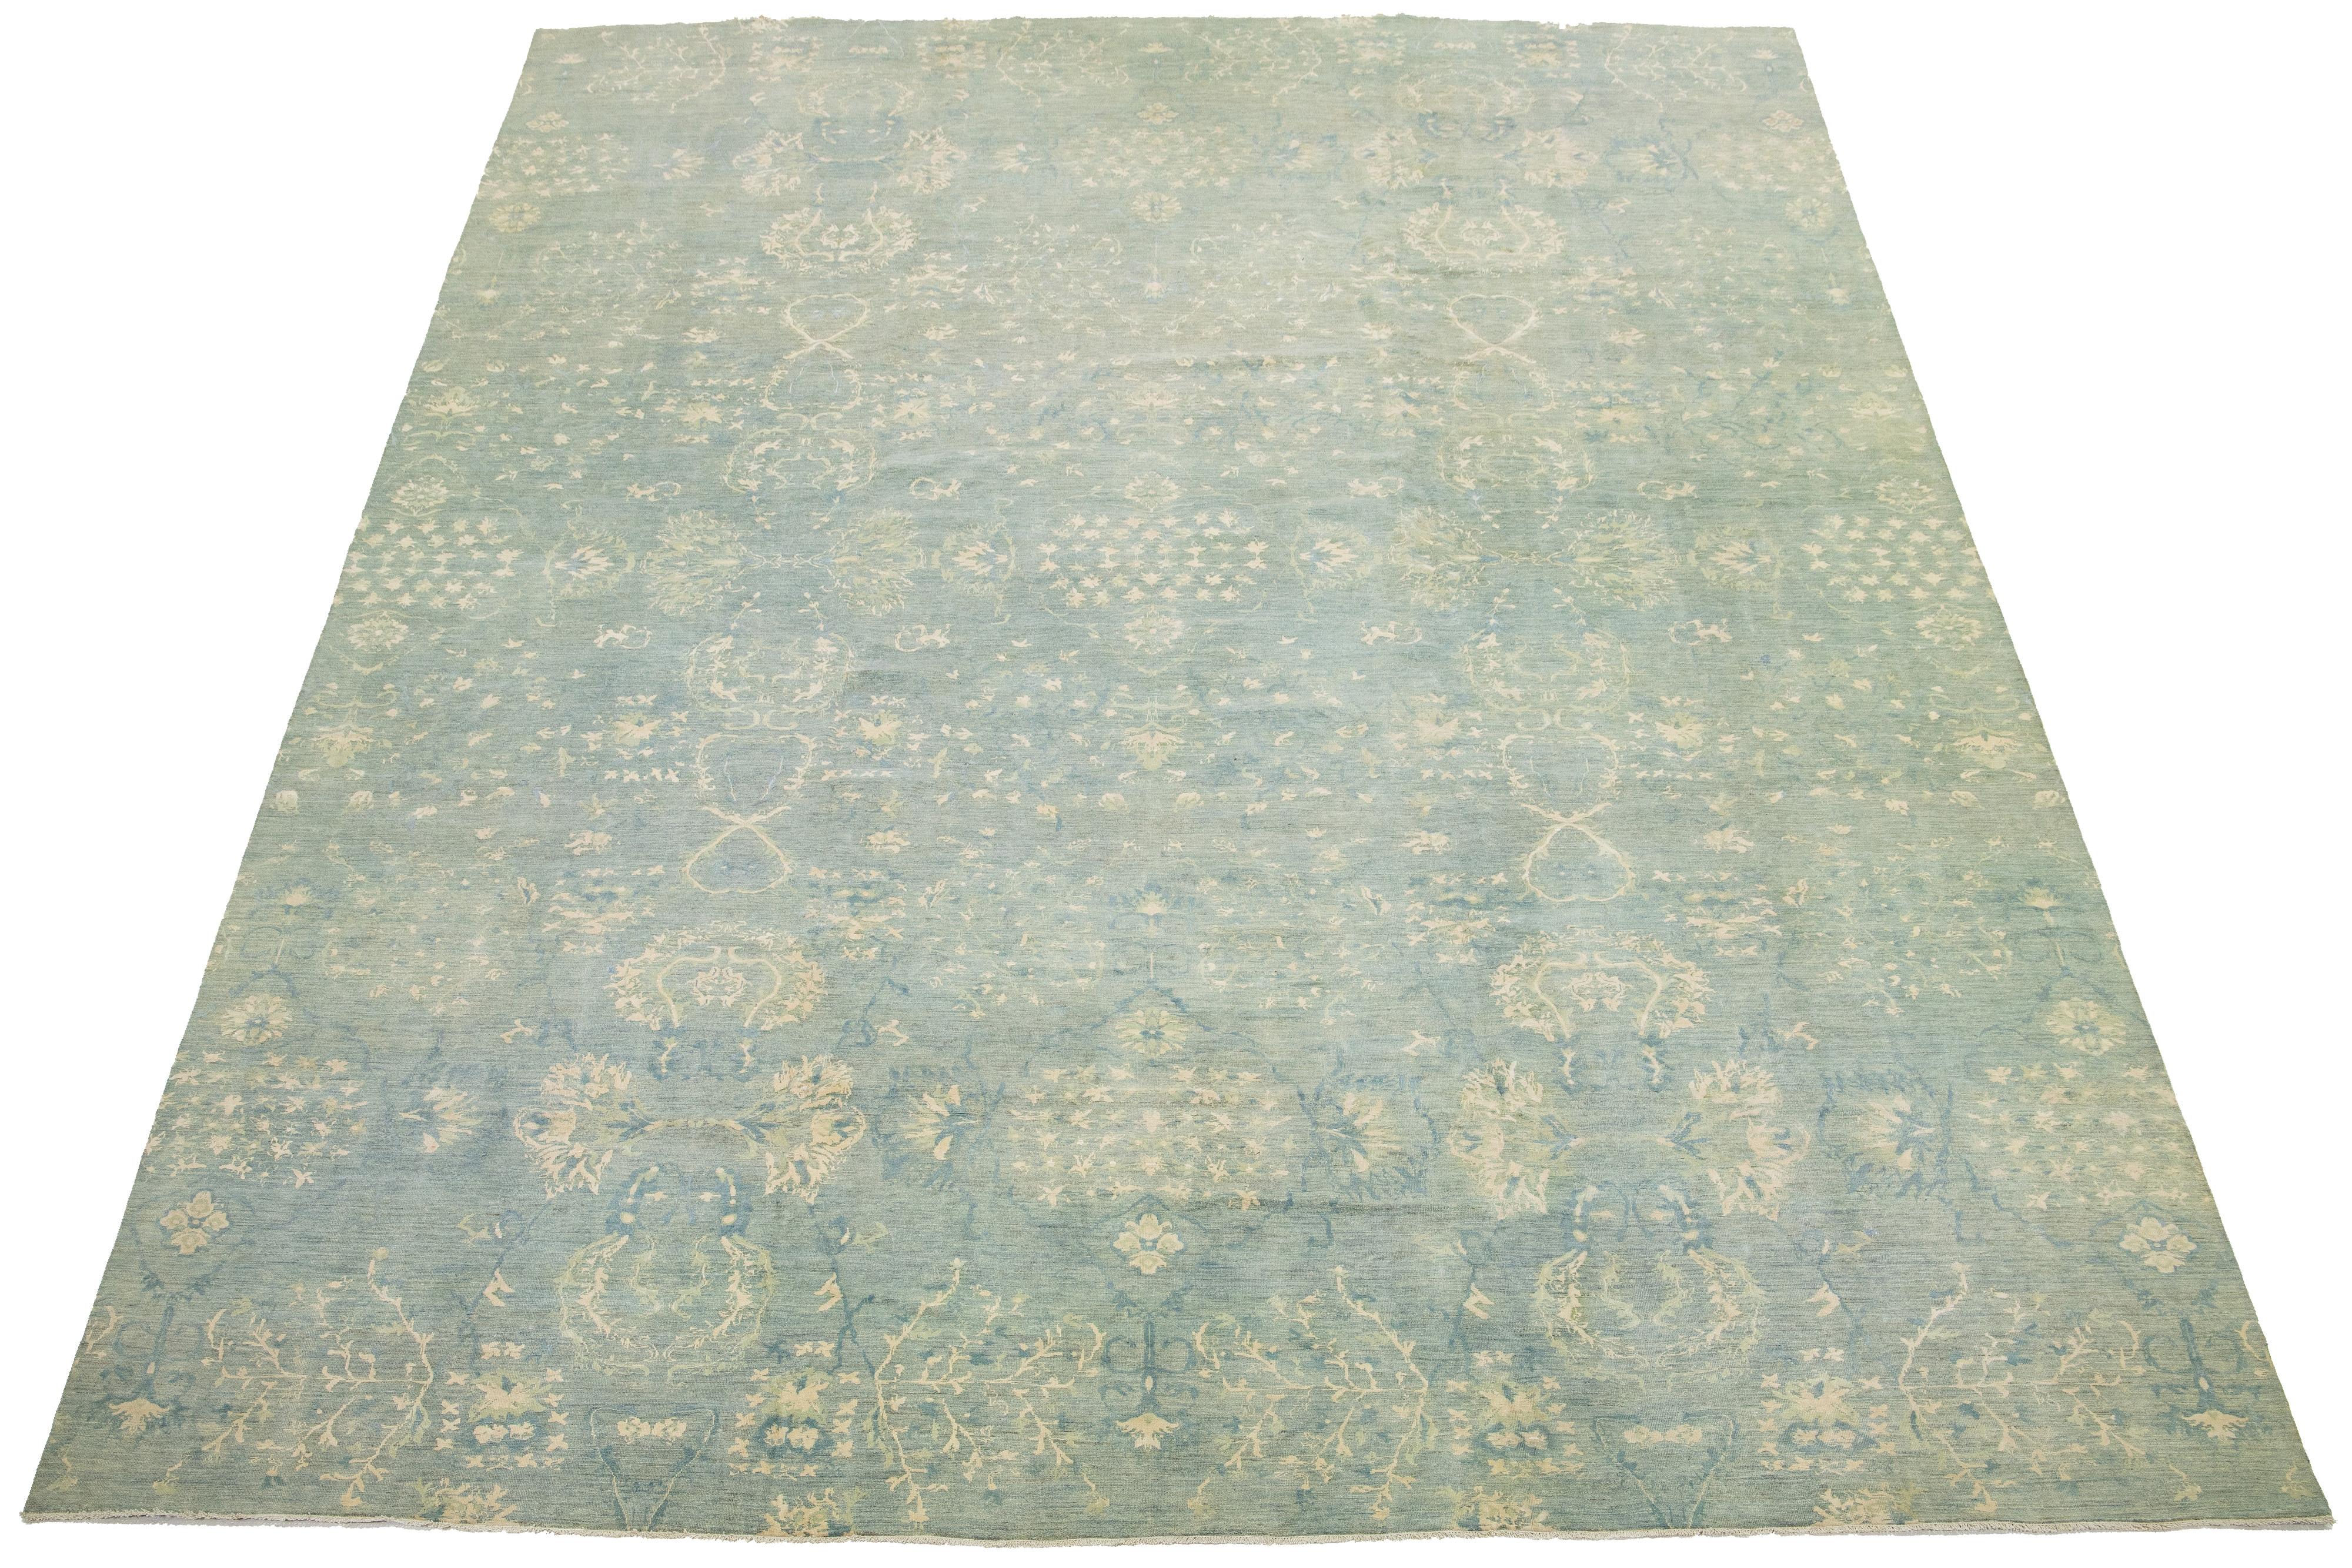 This is an oversized contemporary Khotan wool rug from India. The design showcases a deep blue and green base with intricate cream-colored patterns. These include eye-catching floral elements.

This rug measures 13'9